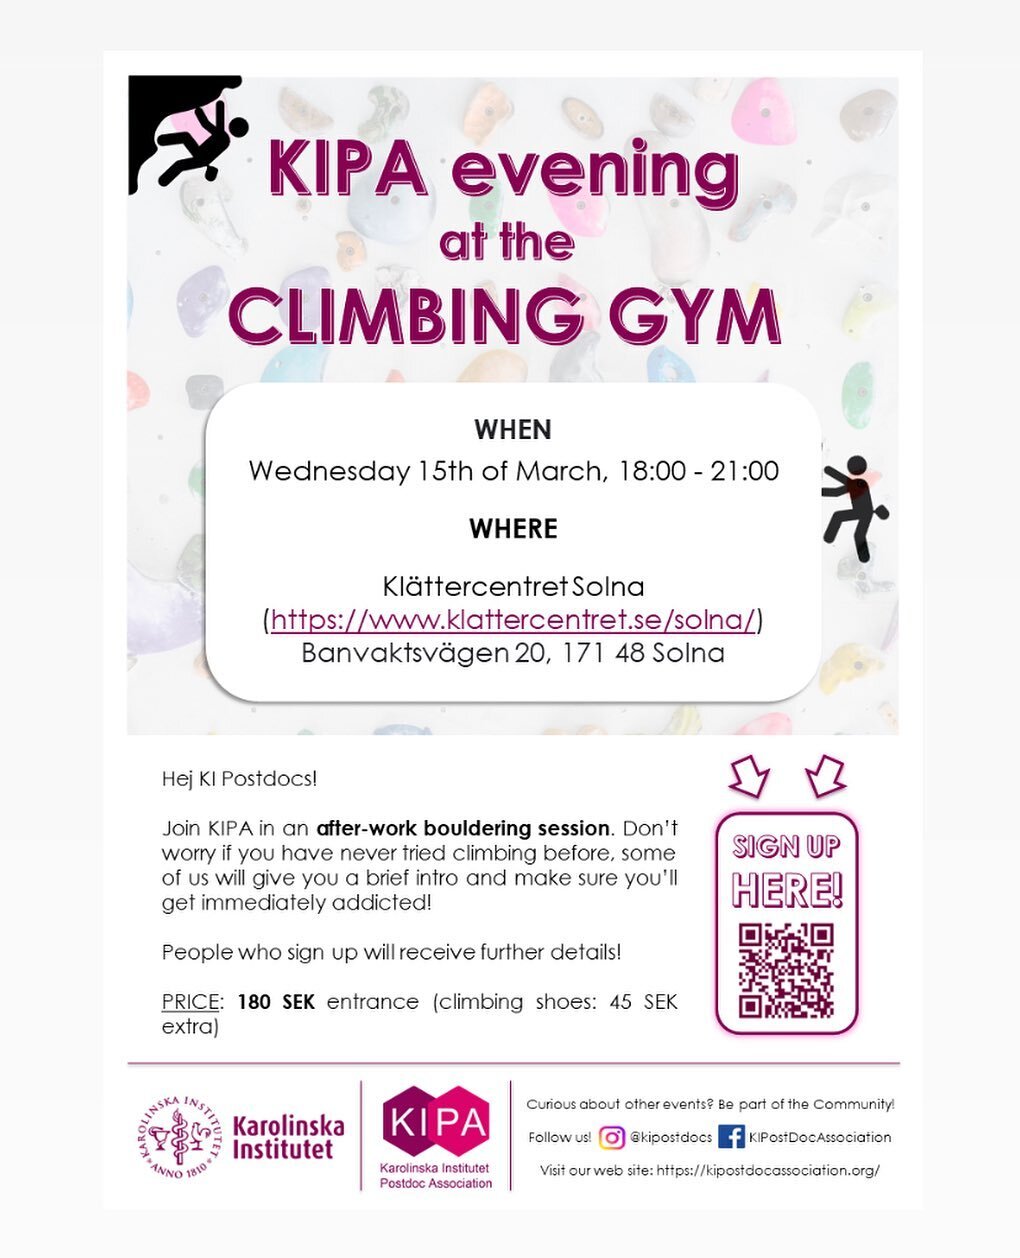 Join KIPA in an after-work bouldering session this Wednesday evening! Sign up now - https://tinyurl.com/2x7ake7v